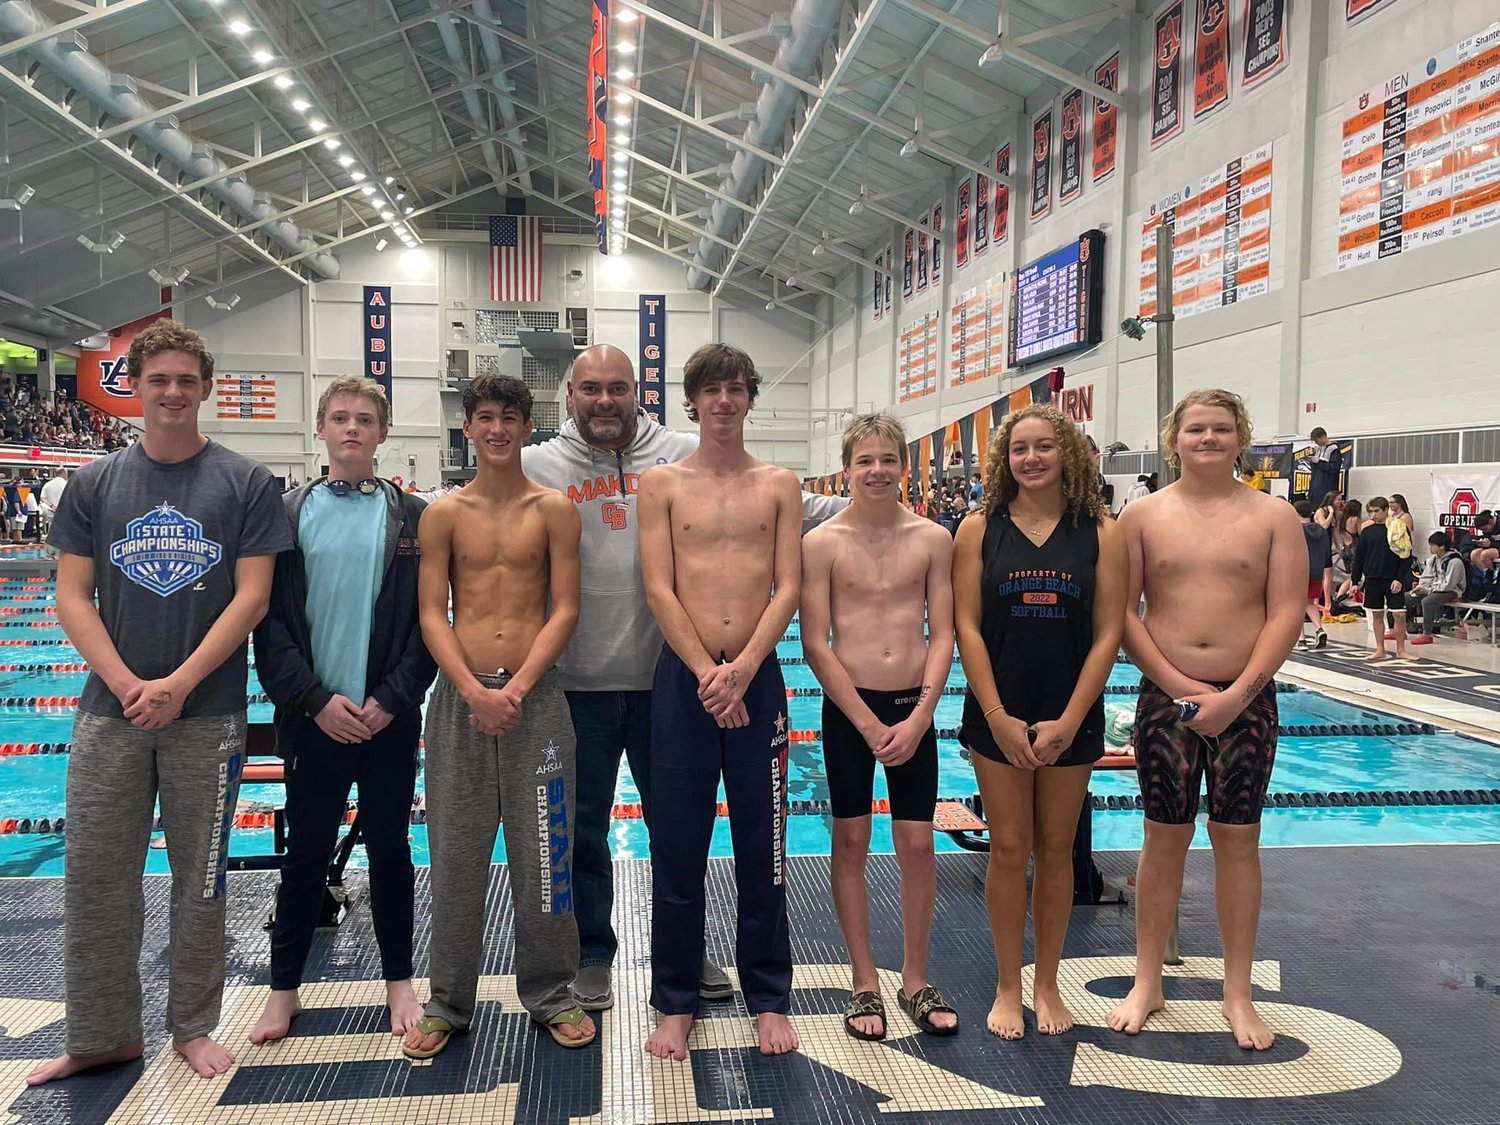 Orange Beach swimmers competed at the swimming and diving state championship meet at Auburn University last weekend. Lucean Pingrey recorded the Makos' best finish with a fourth-place spot in the 200-yard freestyle race.